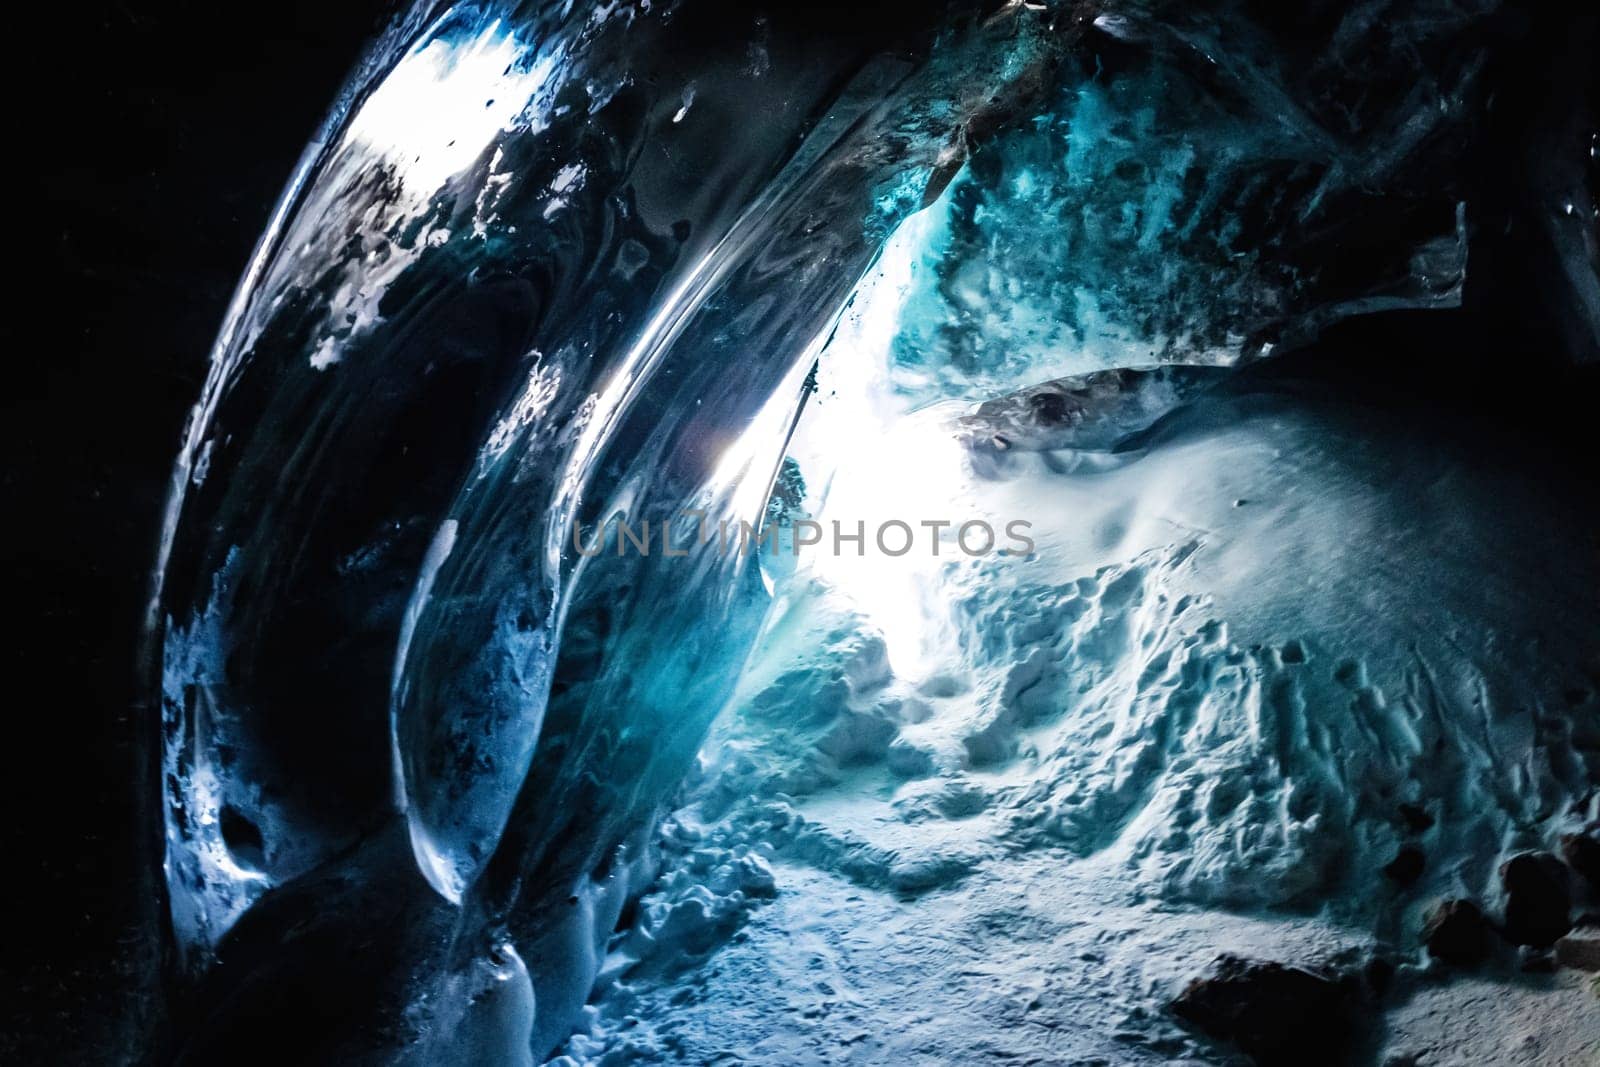 Mesmerizing ice cave amidst the dark landscape of the Bogdanovich Glacier in the Almaty Mountains of Kazakhstan emits a radiant electric blue light, crafting a captivating artwork.